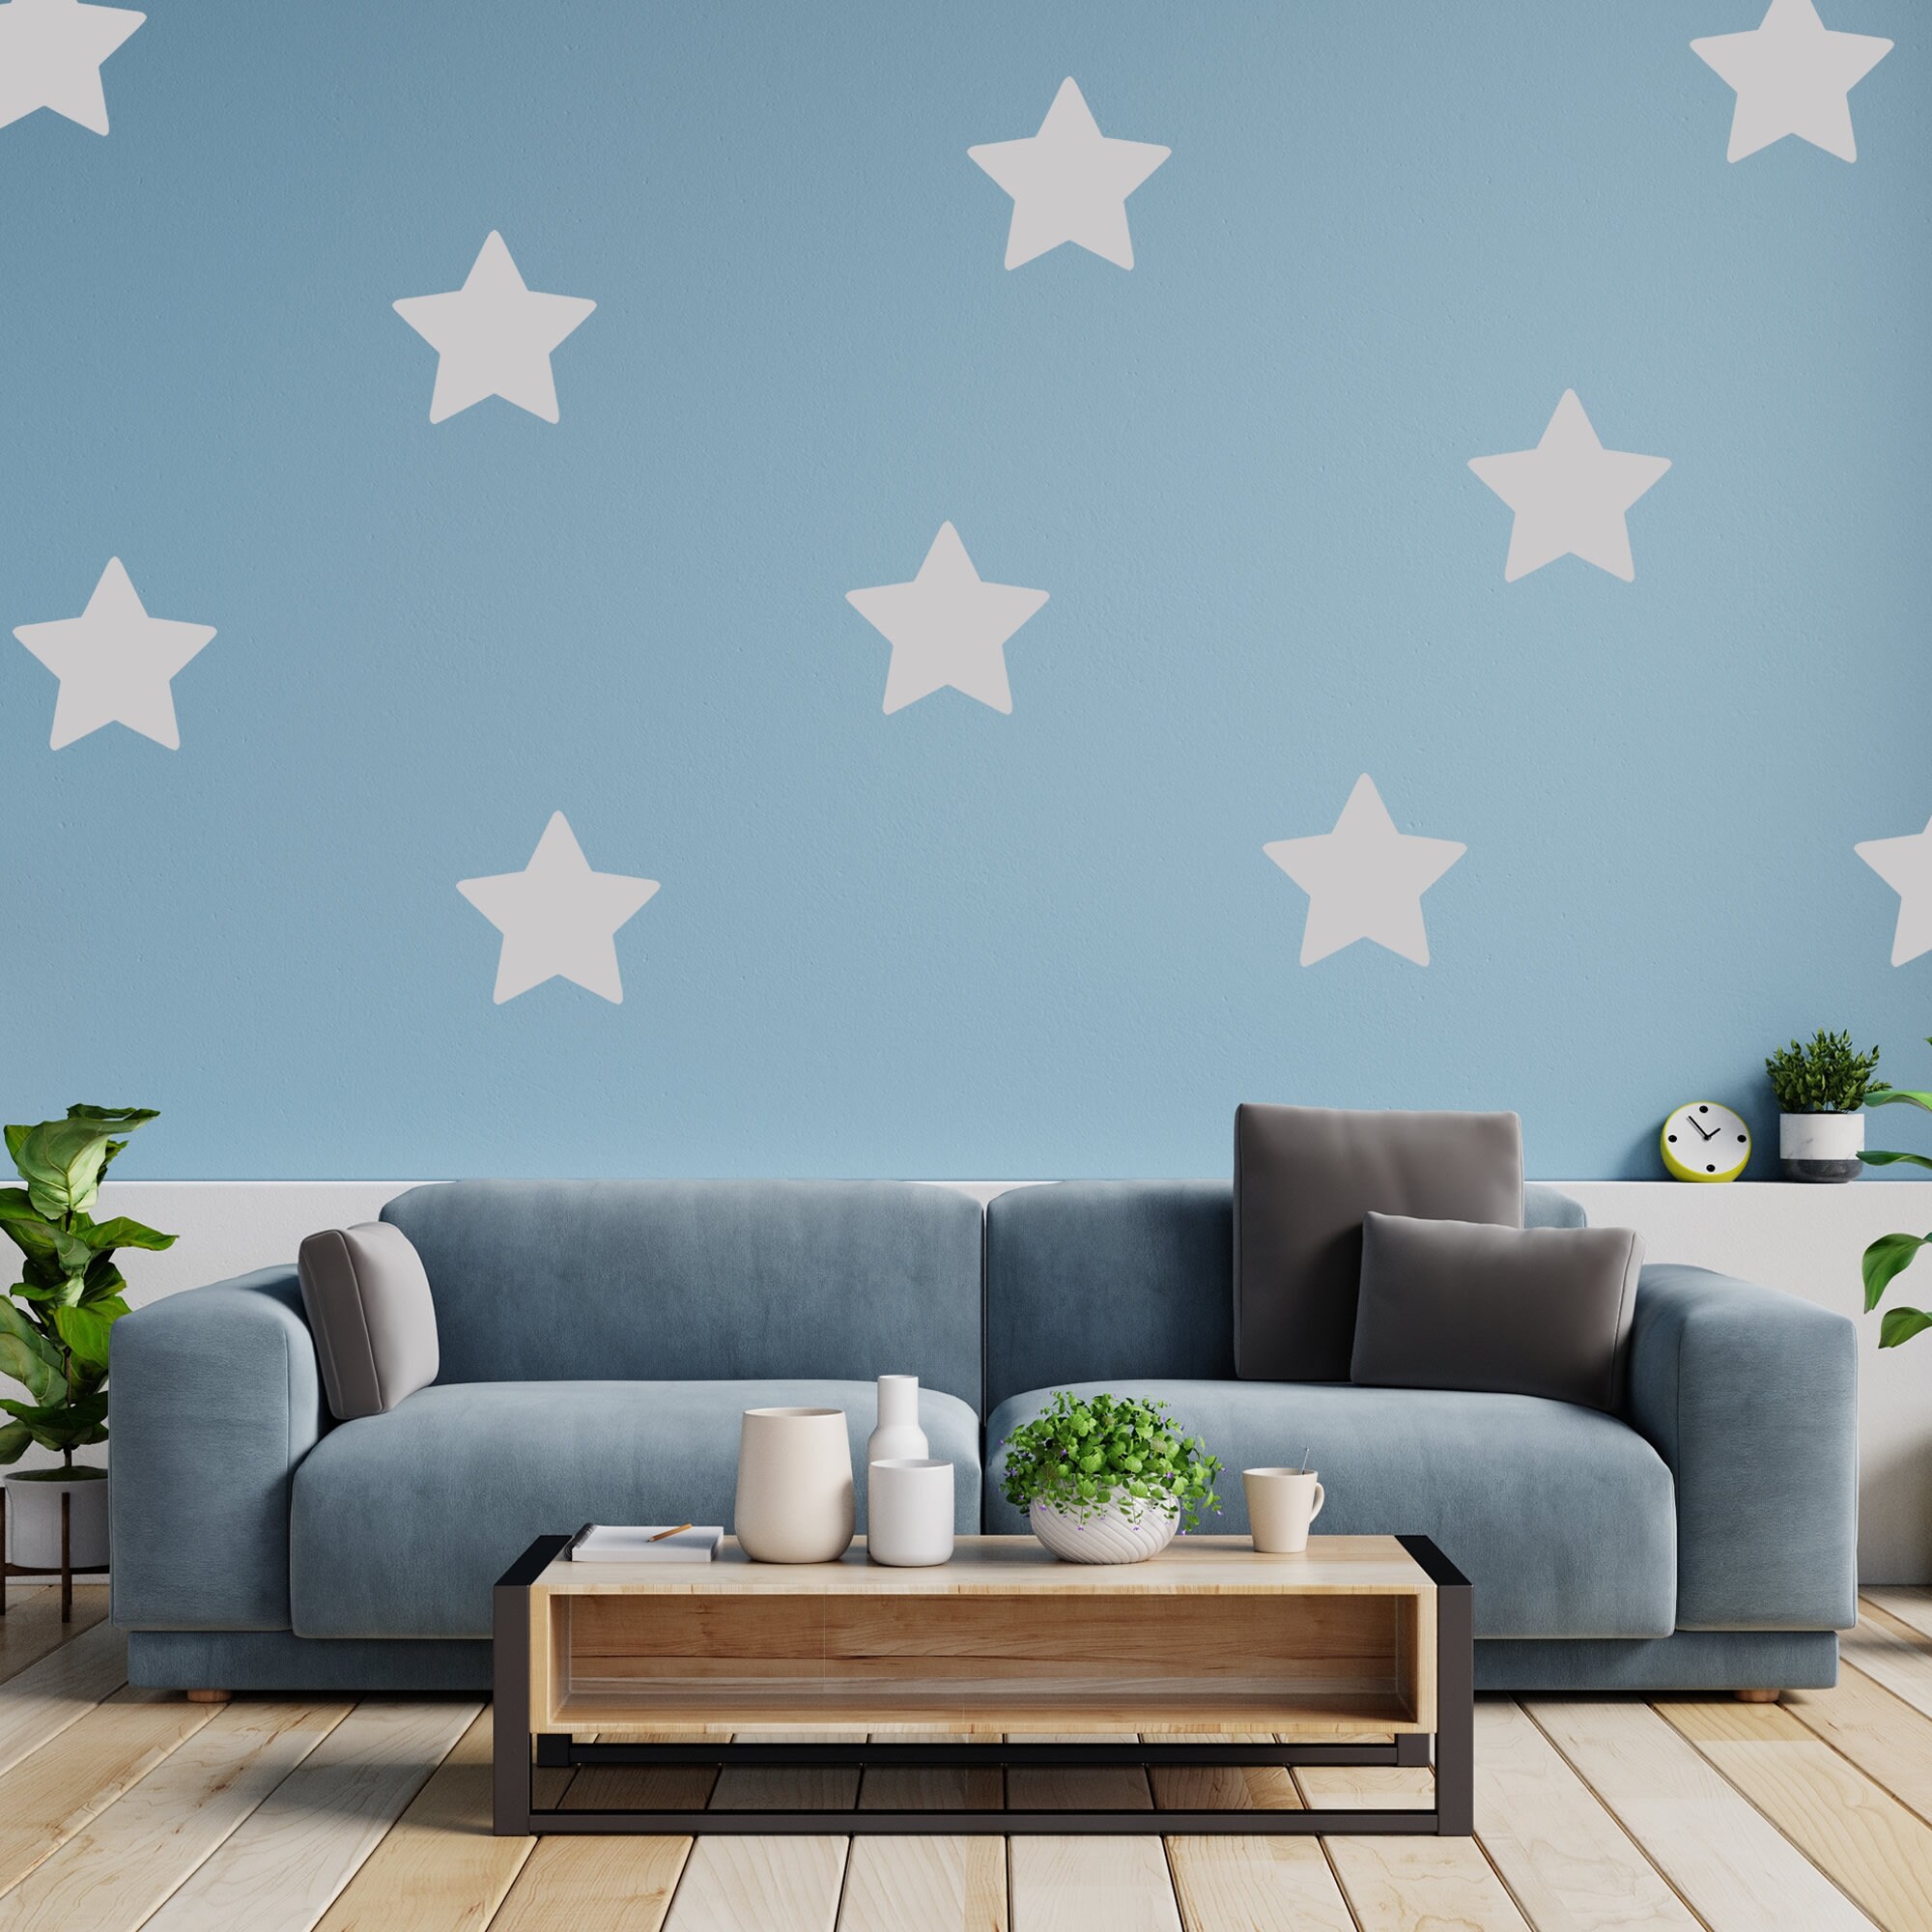 Stencil Revolution Rounded Star Stencil Template for Walls and